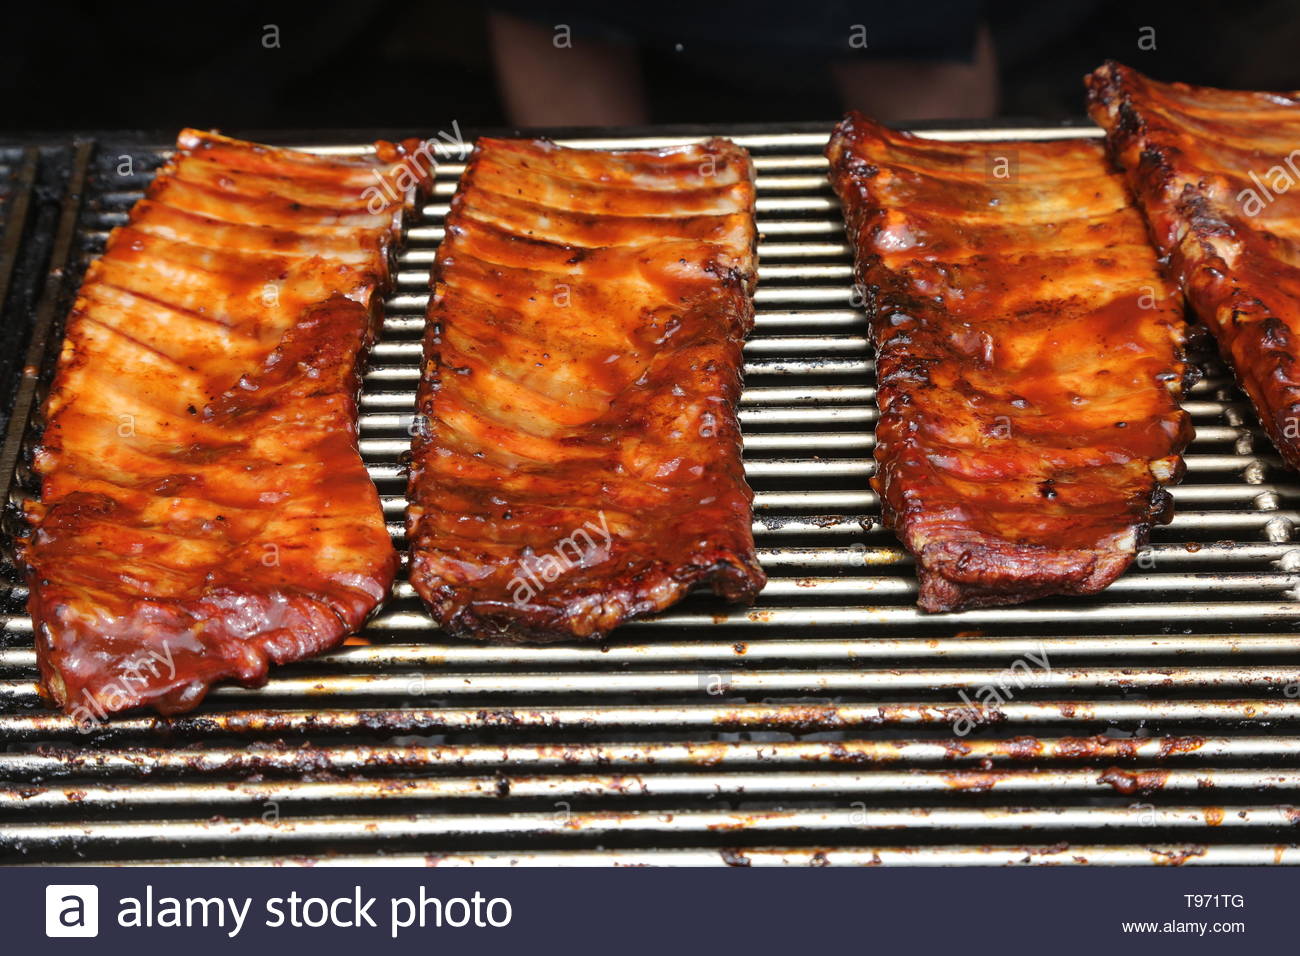 https://c8.alamy.com/comp/T971TG/racks-of-ribs-on-a-large-grill-during-the-toronto-ribfest-in-toronto-ontario-canada-T971TG.jpg